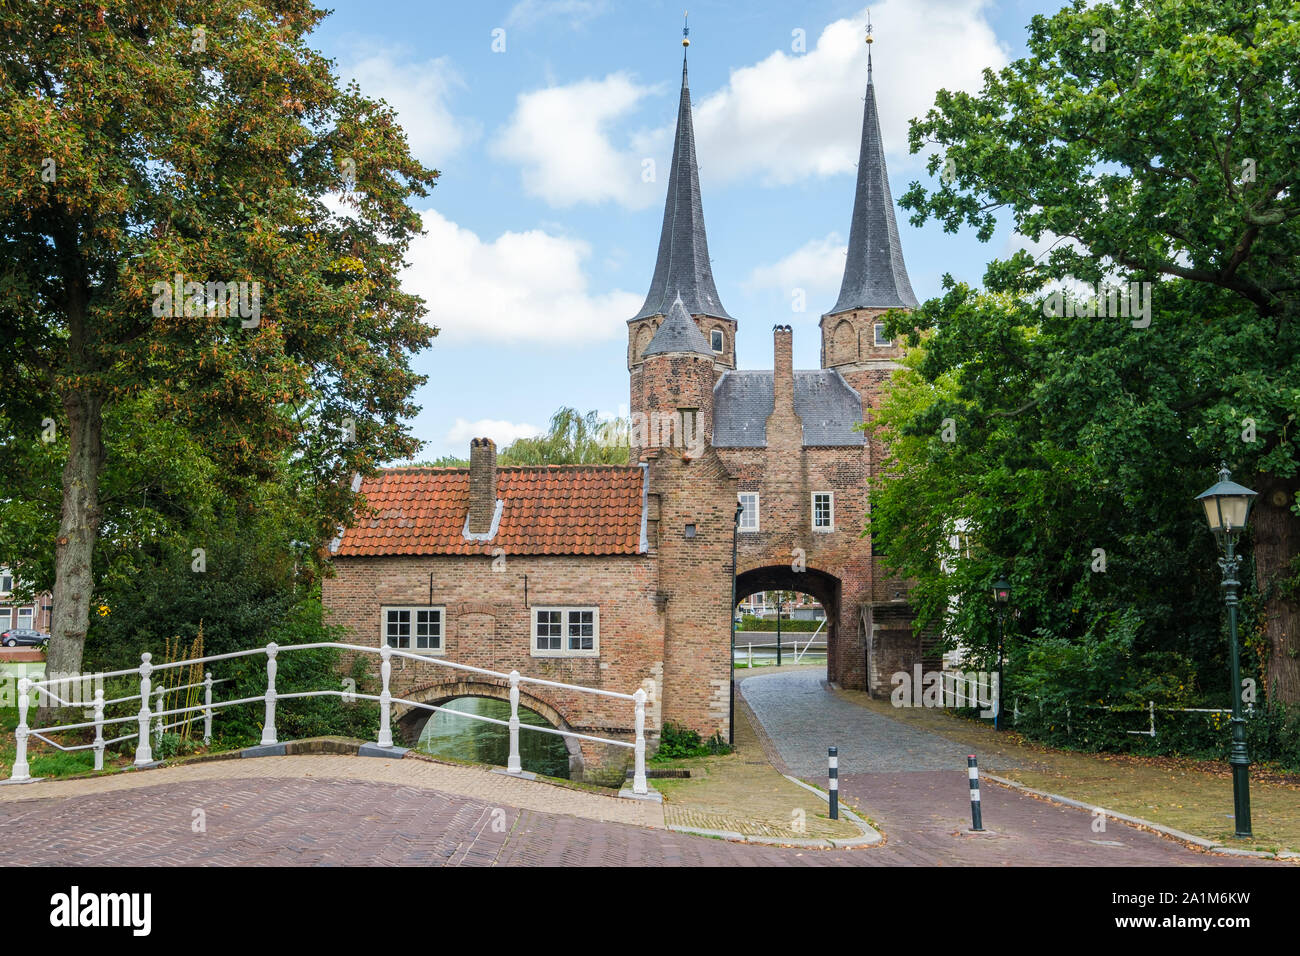 View on the Eastern Gate, an old city gate of Delft, the Netherlands. This gate build around 1400 is the only remaining city gate of Delft. Stock Photo